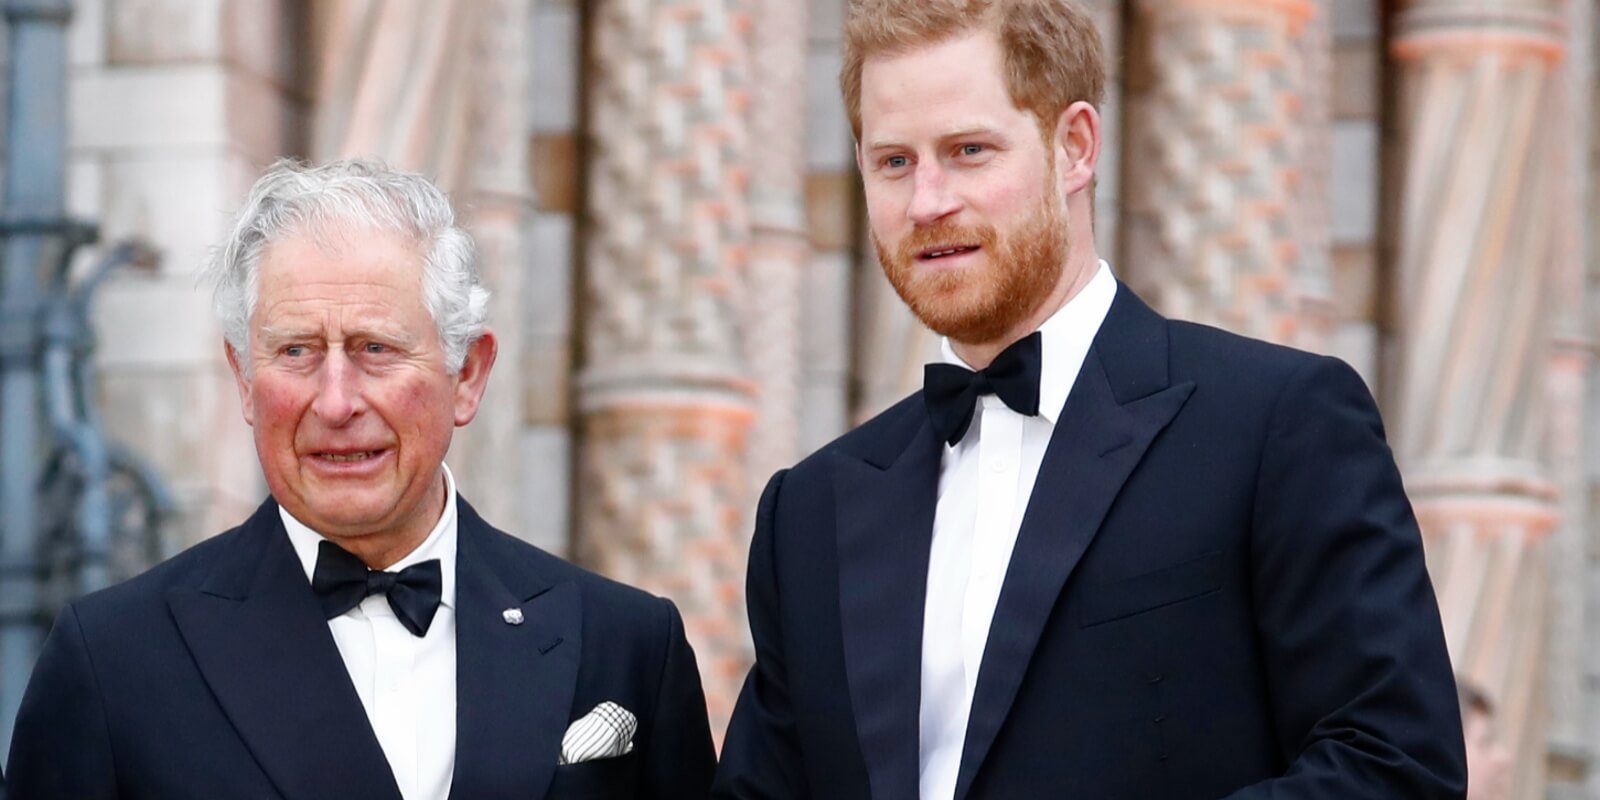 King Charles and Prince harry photographed at the Natural History Museum on April 04, 2019 in London, England.